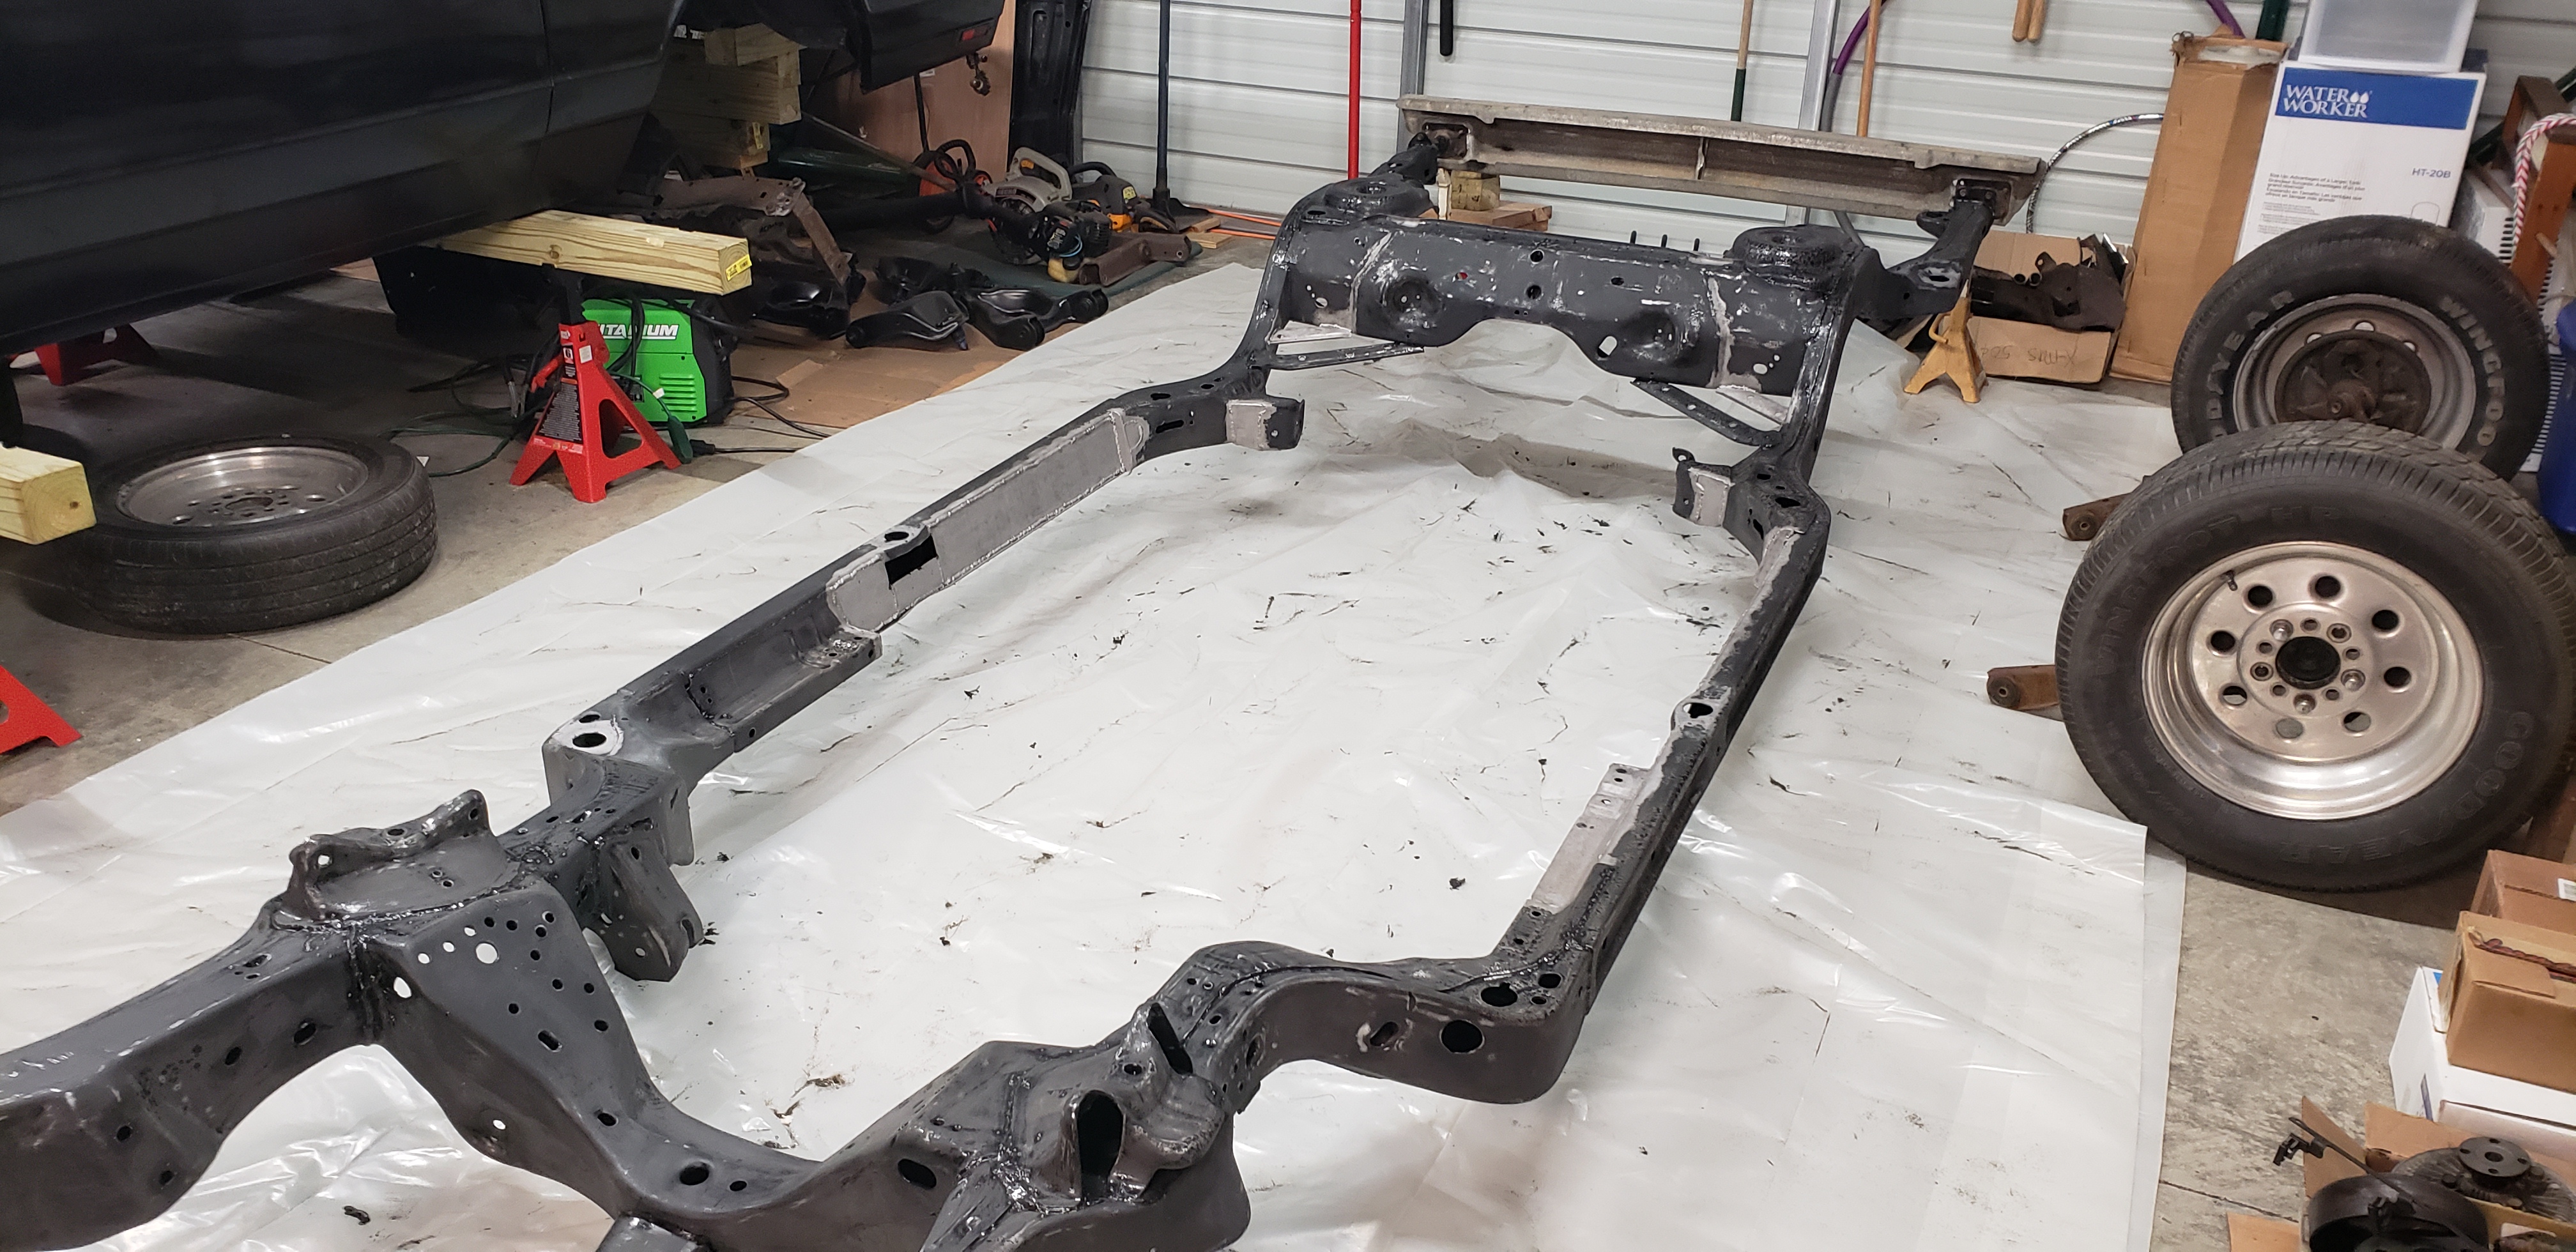 New Frame Prep For Paint After Repair And Modification (12).jpg